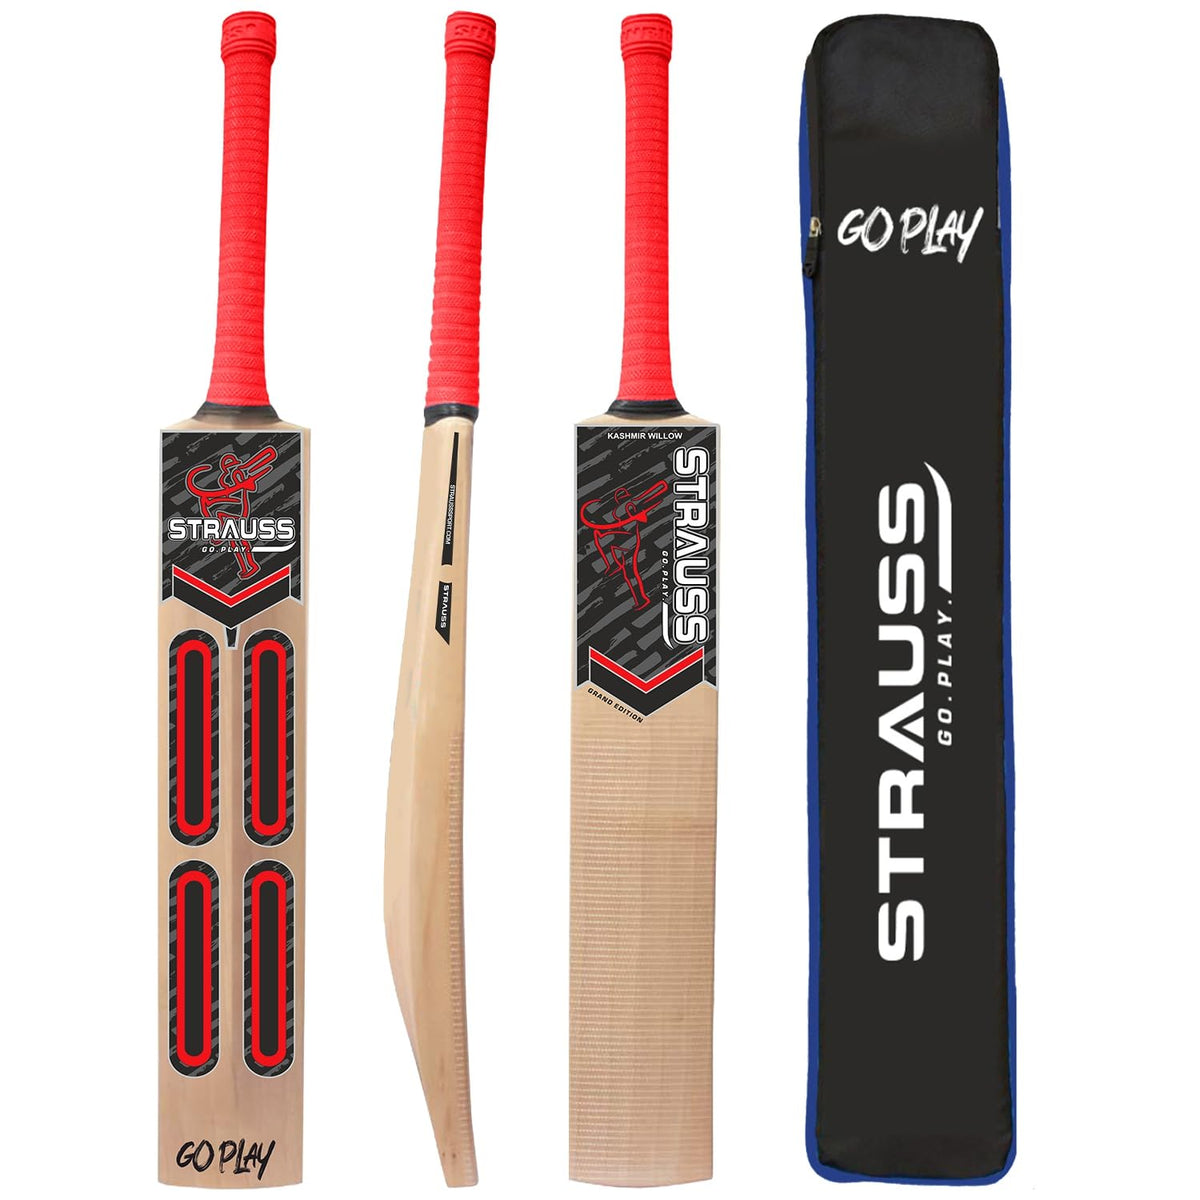 STRAUSS Grand Edition Kashmir Willow Scoop Cricket Bat |Size: Short Hand |Red| Suitable for Tennis Ball|Ideal for Boys/Youth/Adults (900-1050 Grams)